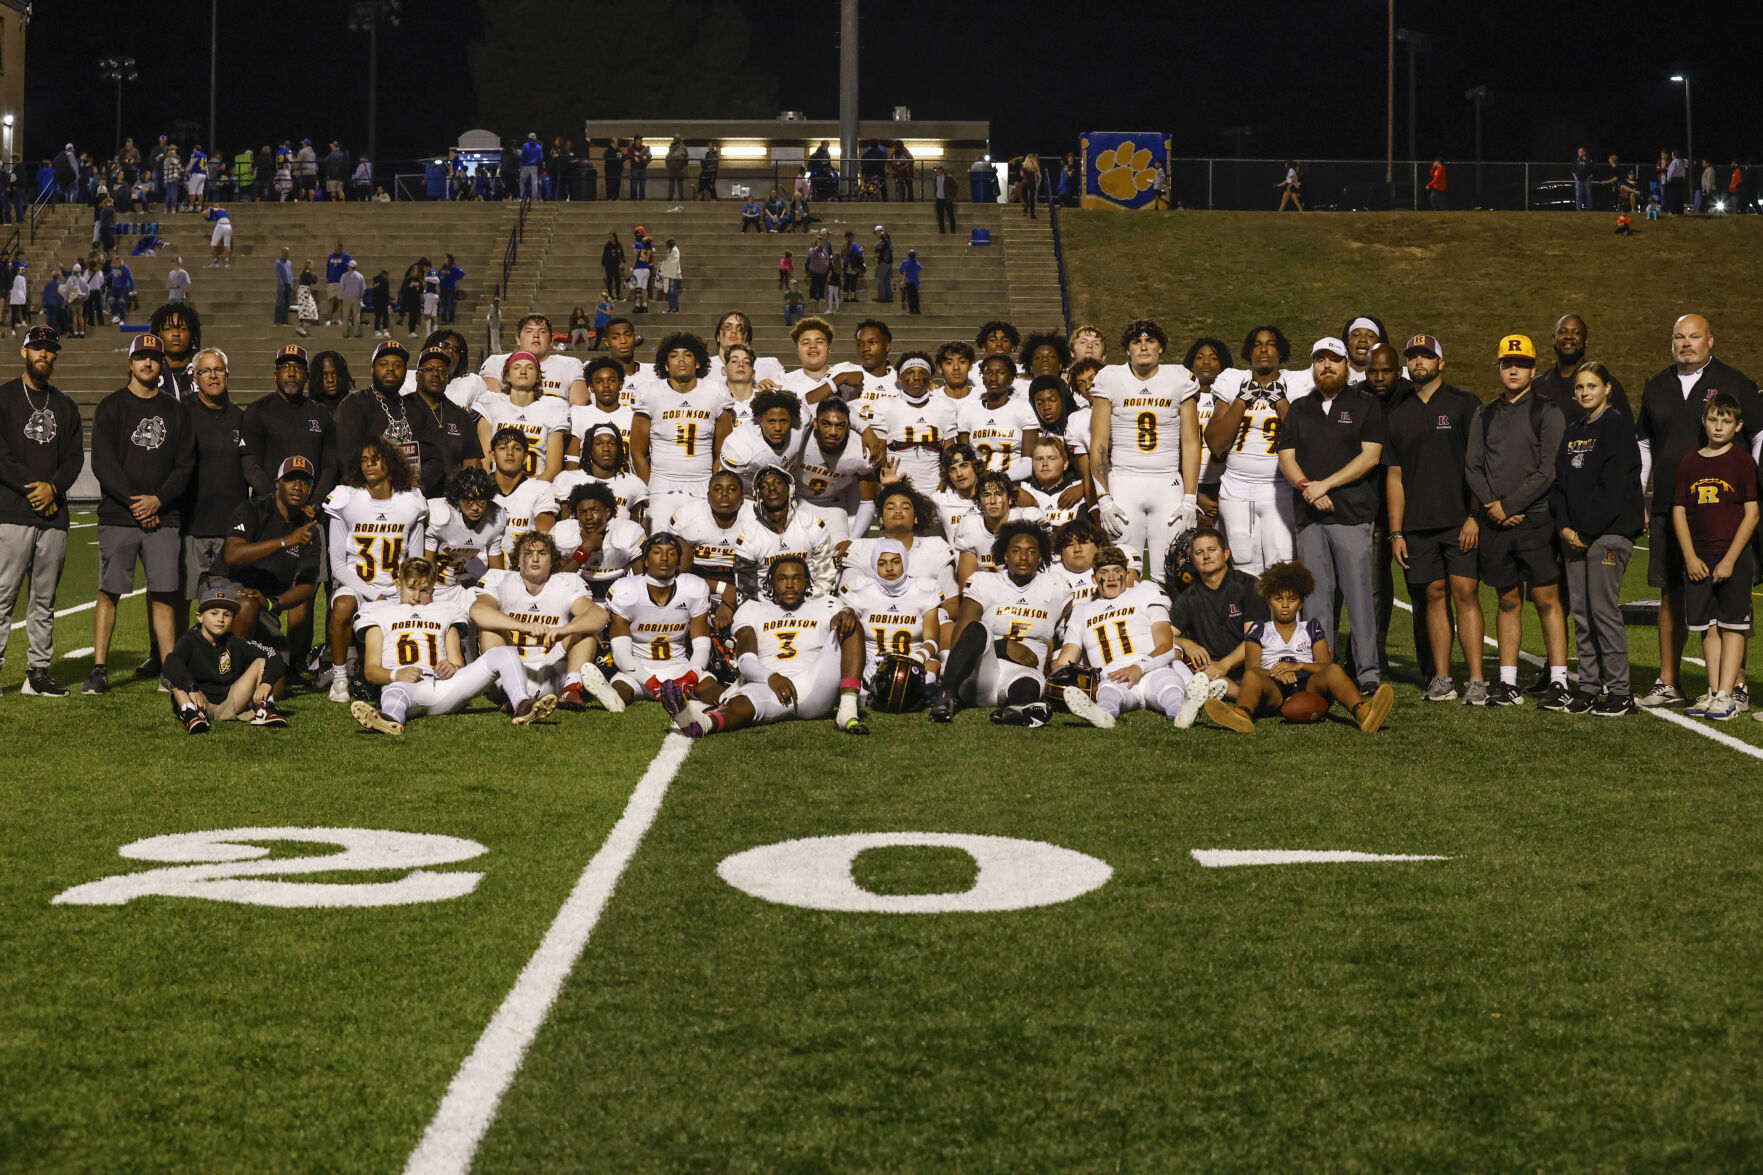 Jay M. Robinson Bulldogs Finish Undefeated and Win Conference Championship, Cox Mill Chargers defy Expectations and Qualify for Playoffs, Mount Pleasant Tigers Continue Playoff Streak